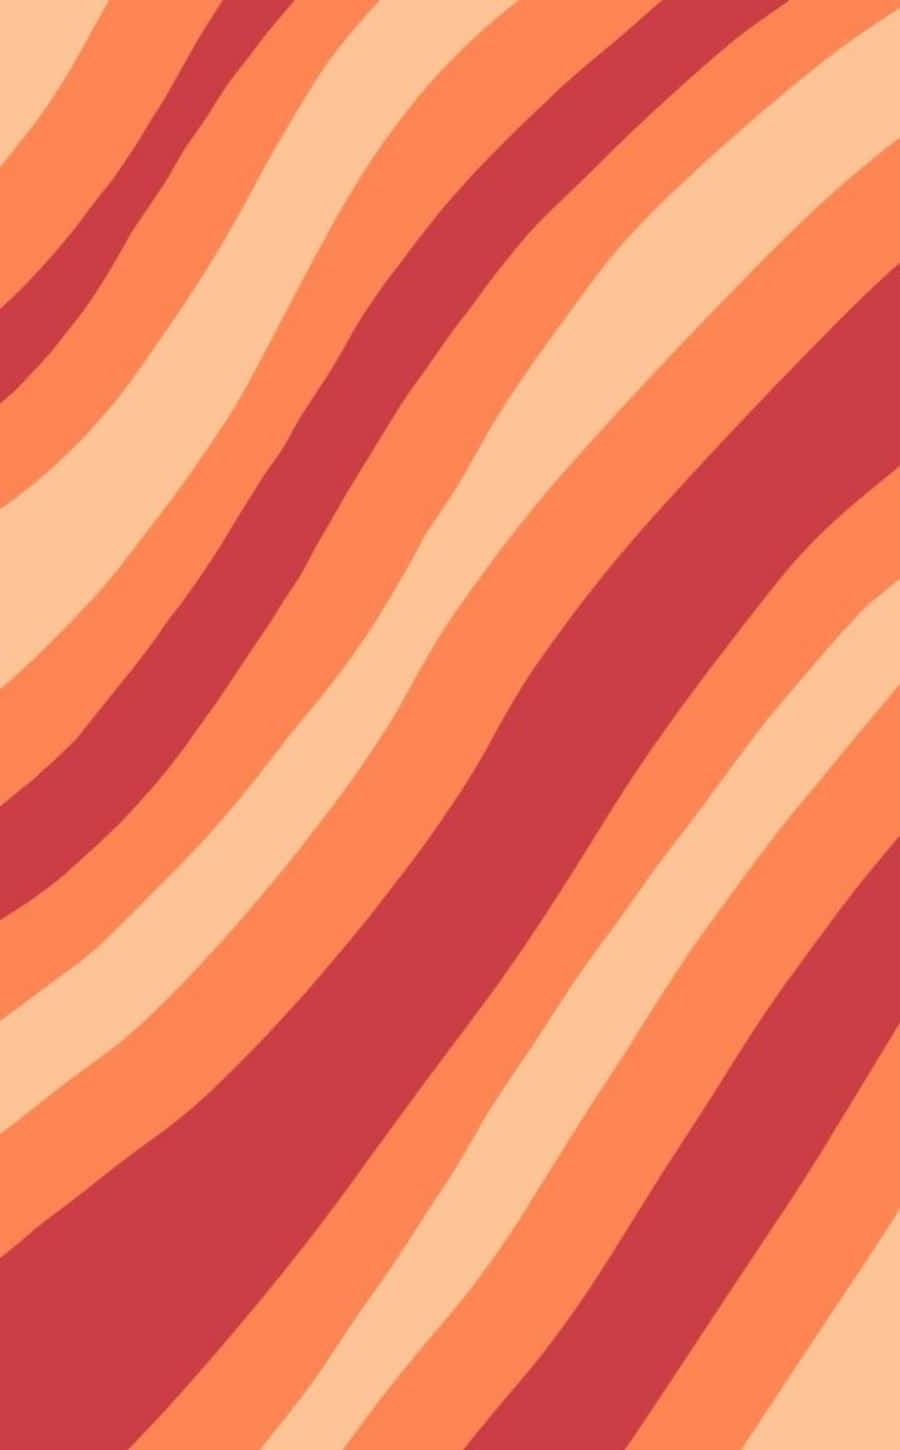 Feel groovy in this retro-inspired look Wallpaper